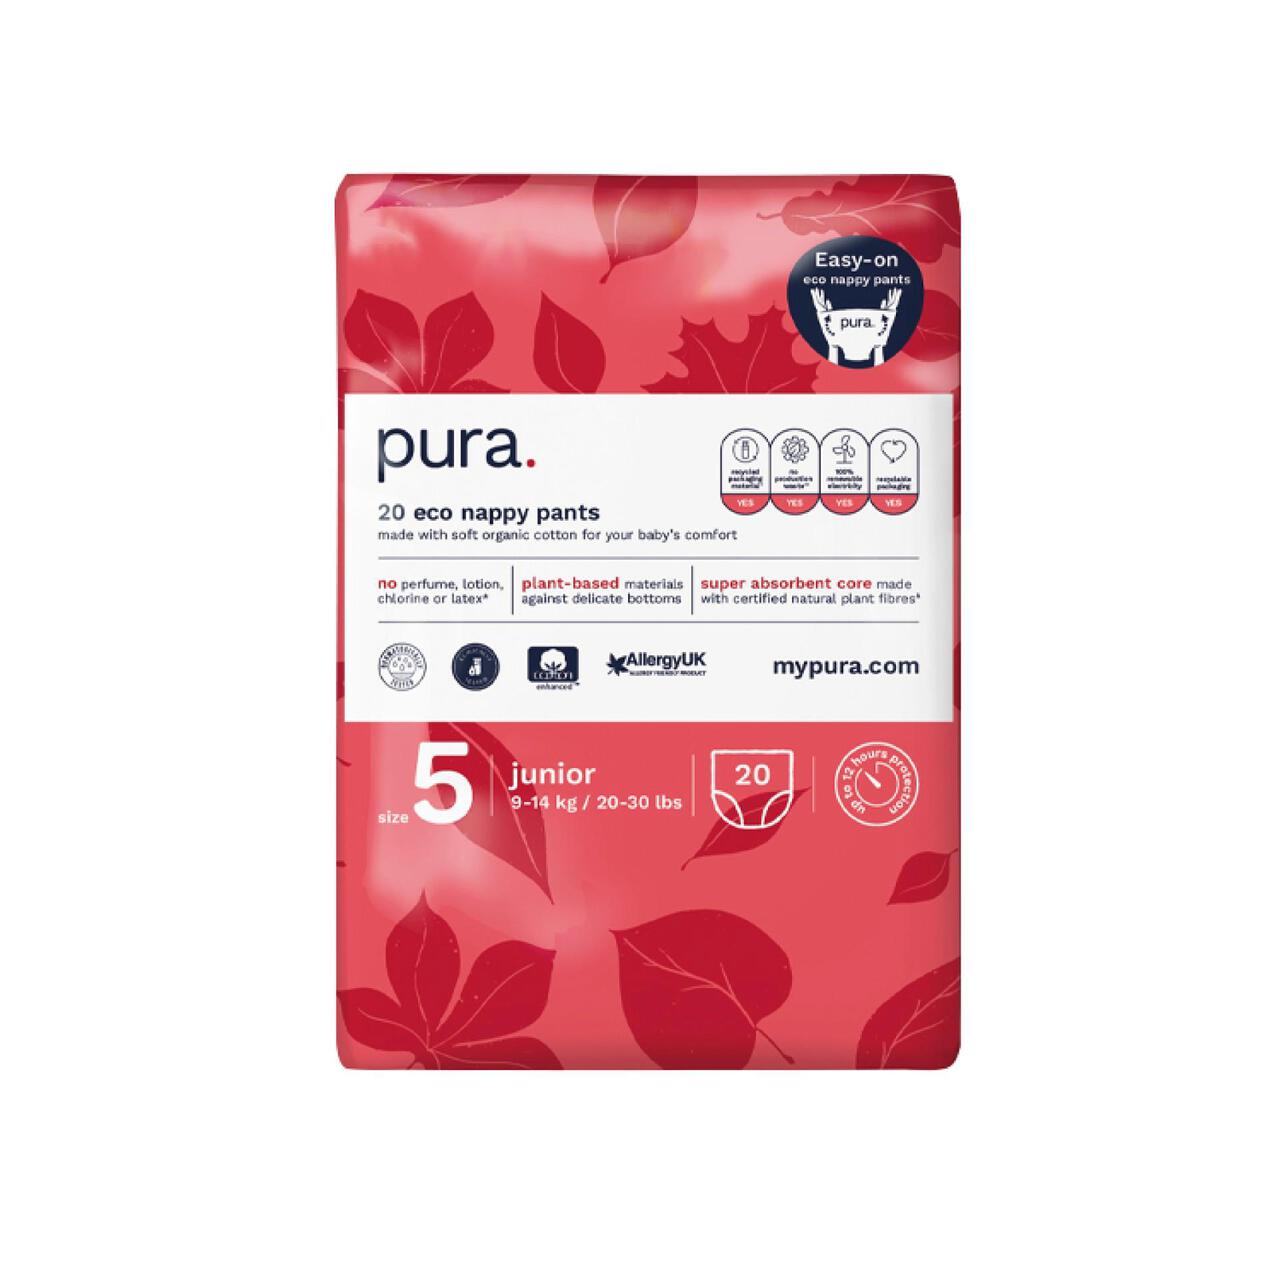 Pura High Performance Eco Nappy Pants, Size 5 (9-14kg) 20 per pack